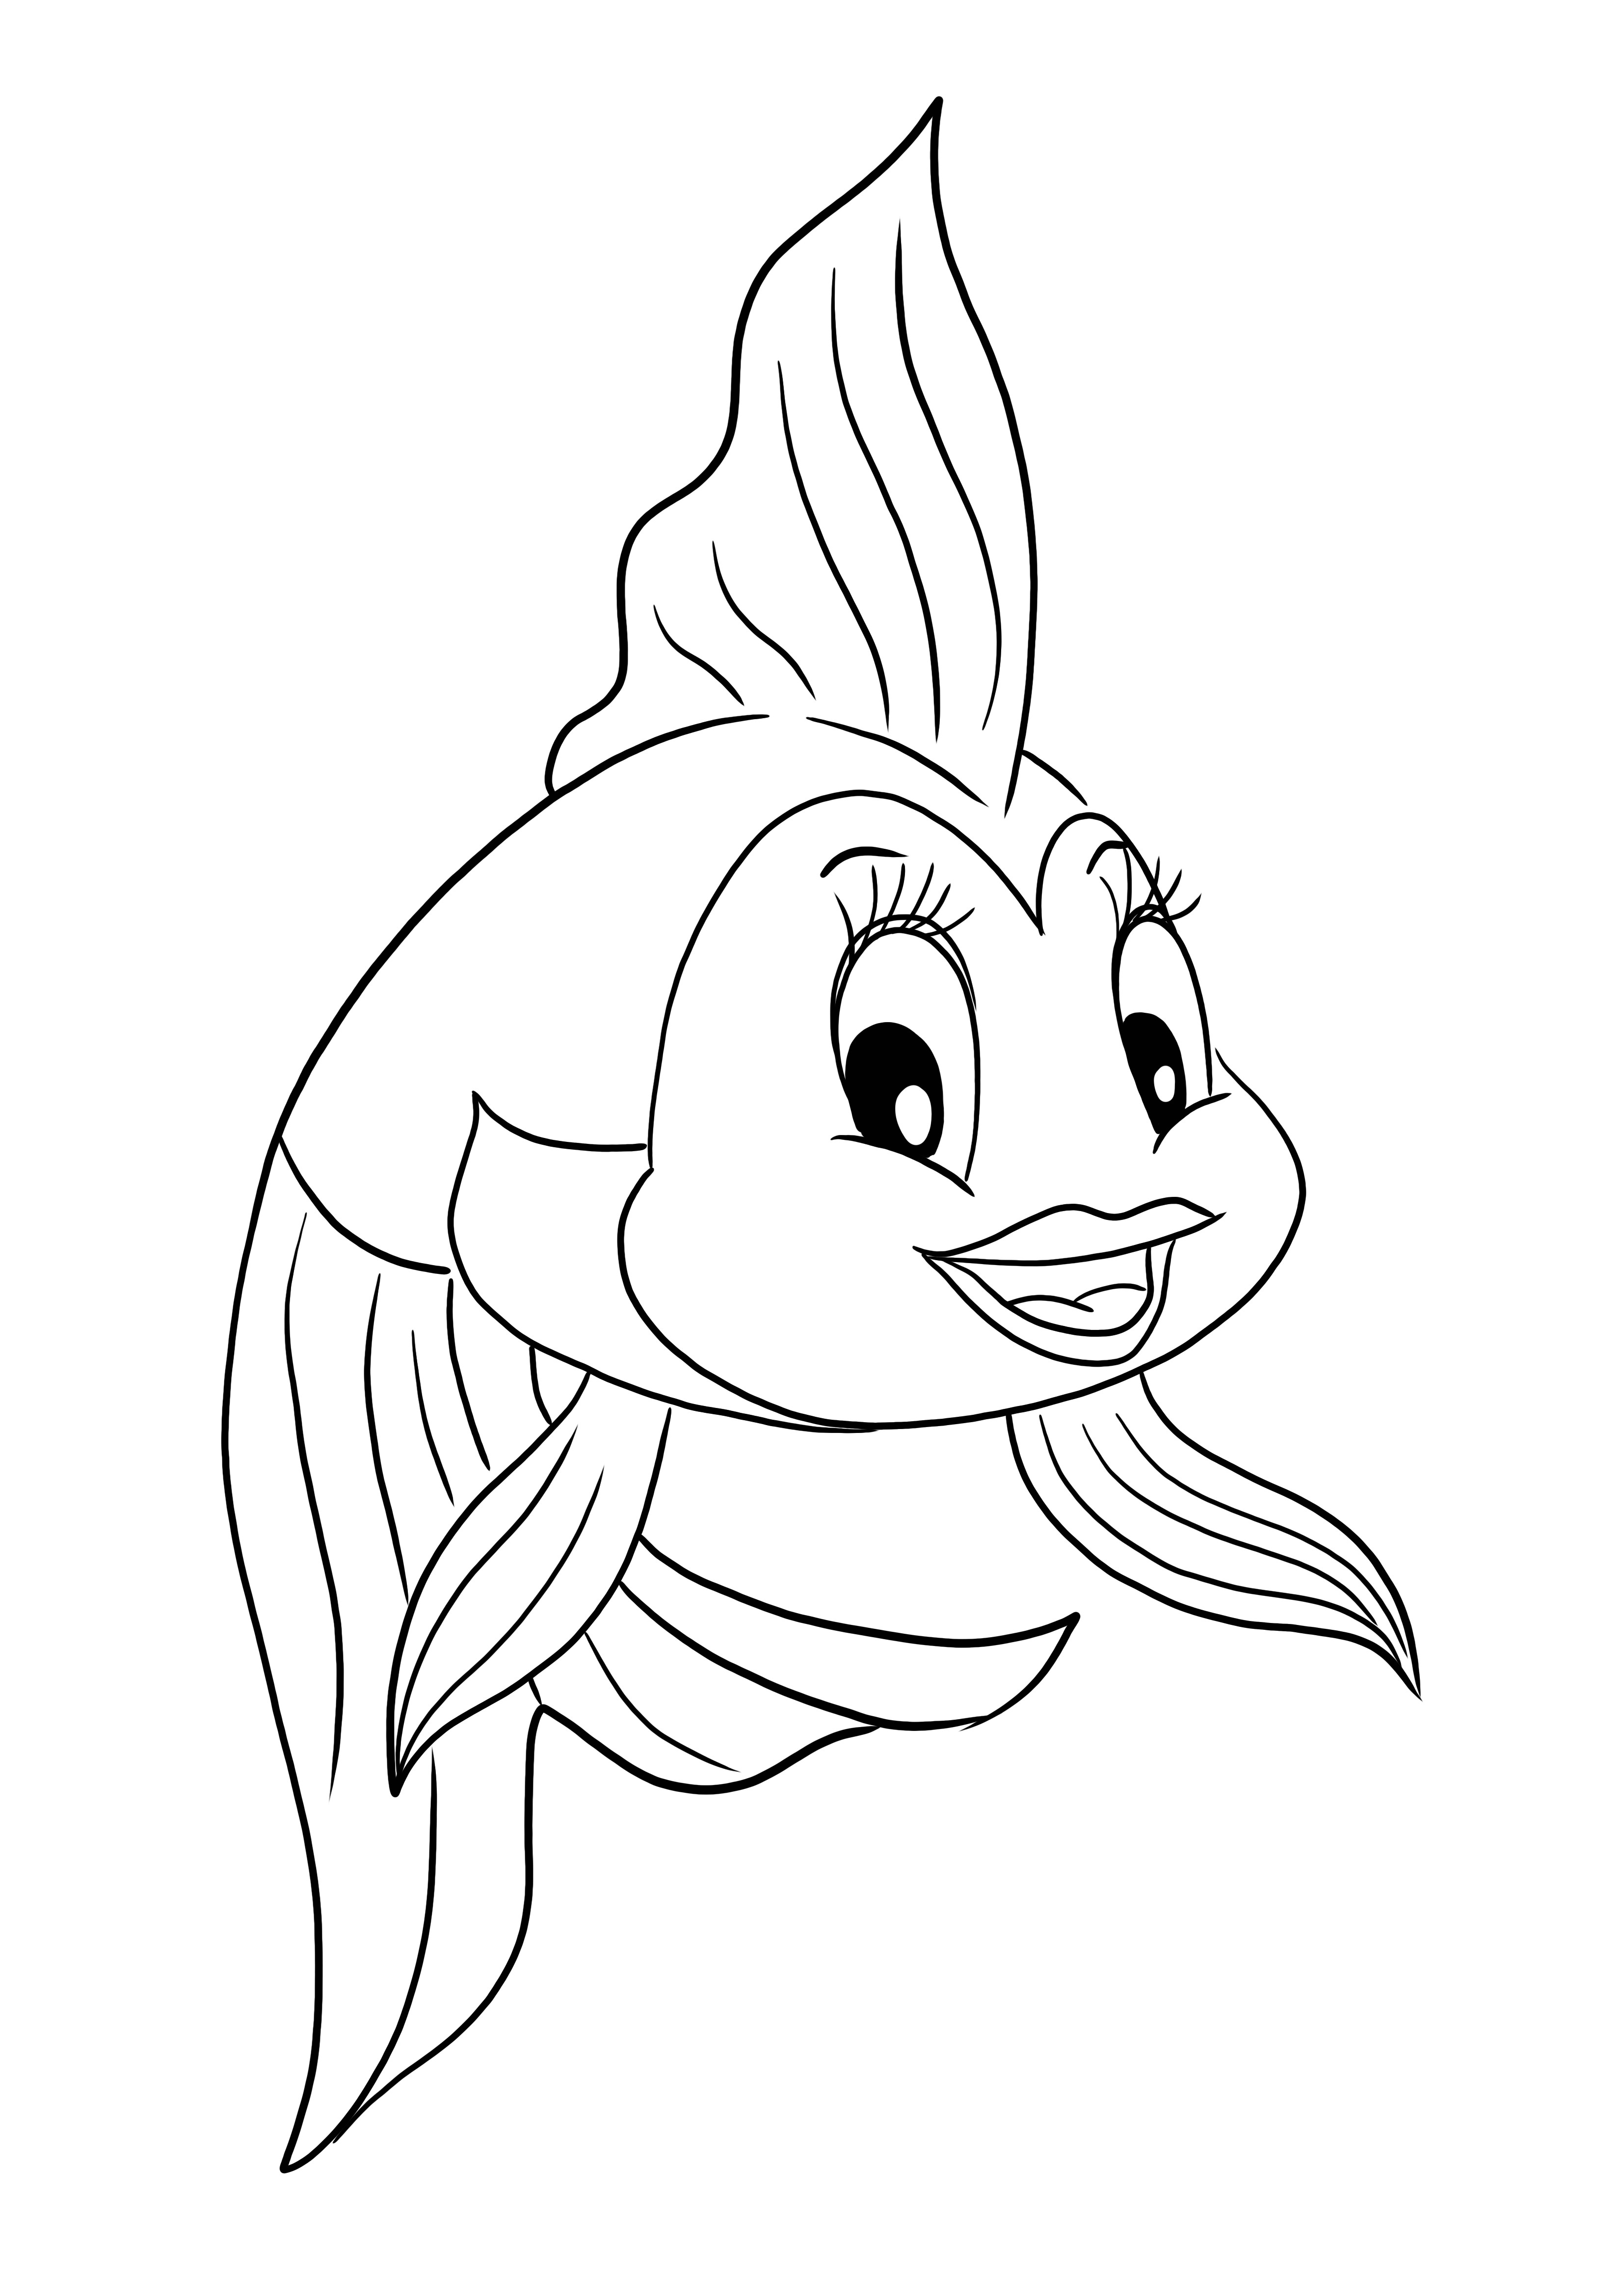 A free-to-color and print page of Cleo the fish from Pinocchio cartoon for kids